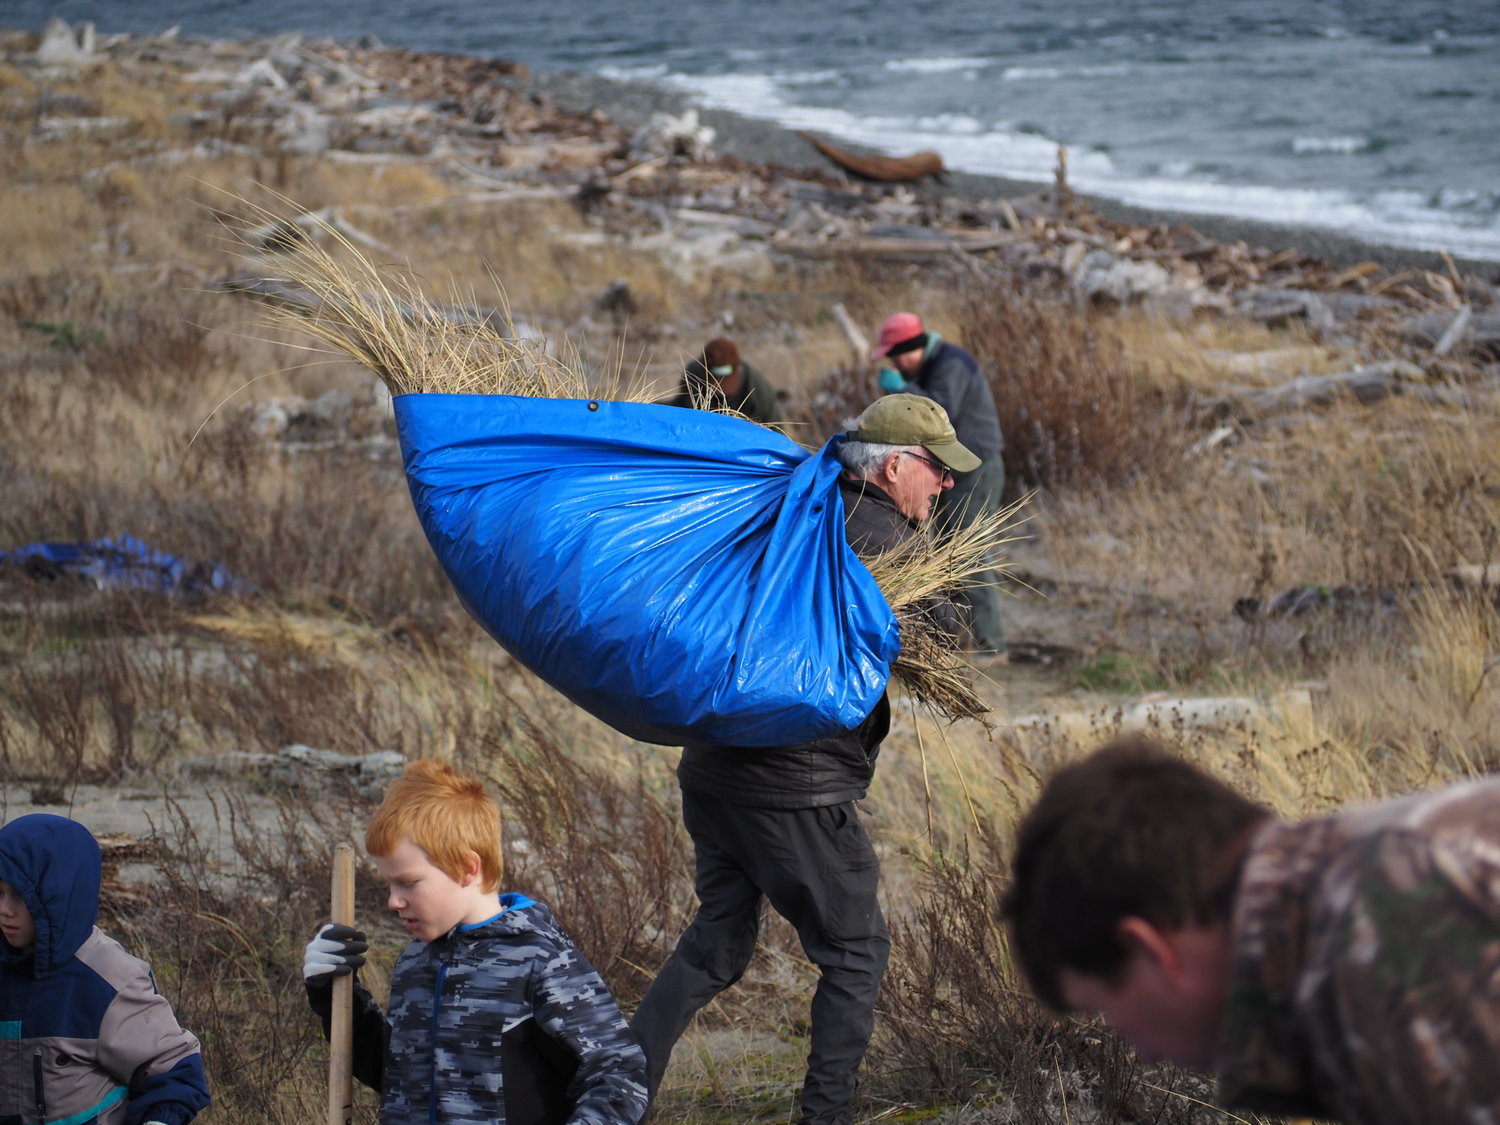 Will Barrett, who volunteers with the Friends of Fort Worden, hauls off a load of invasive beach grass.